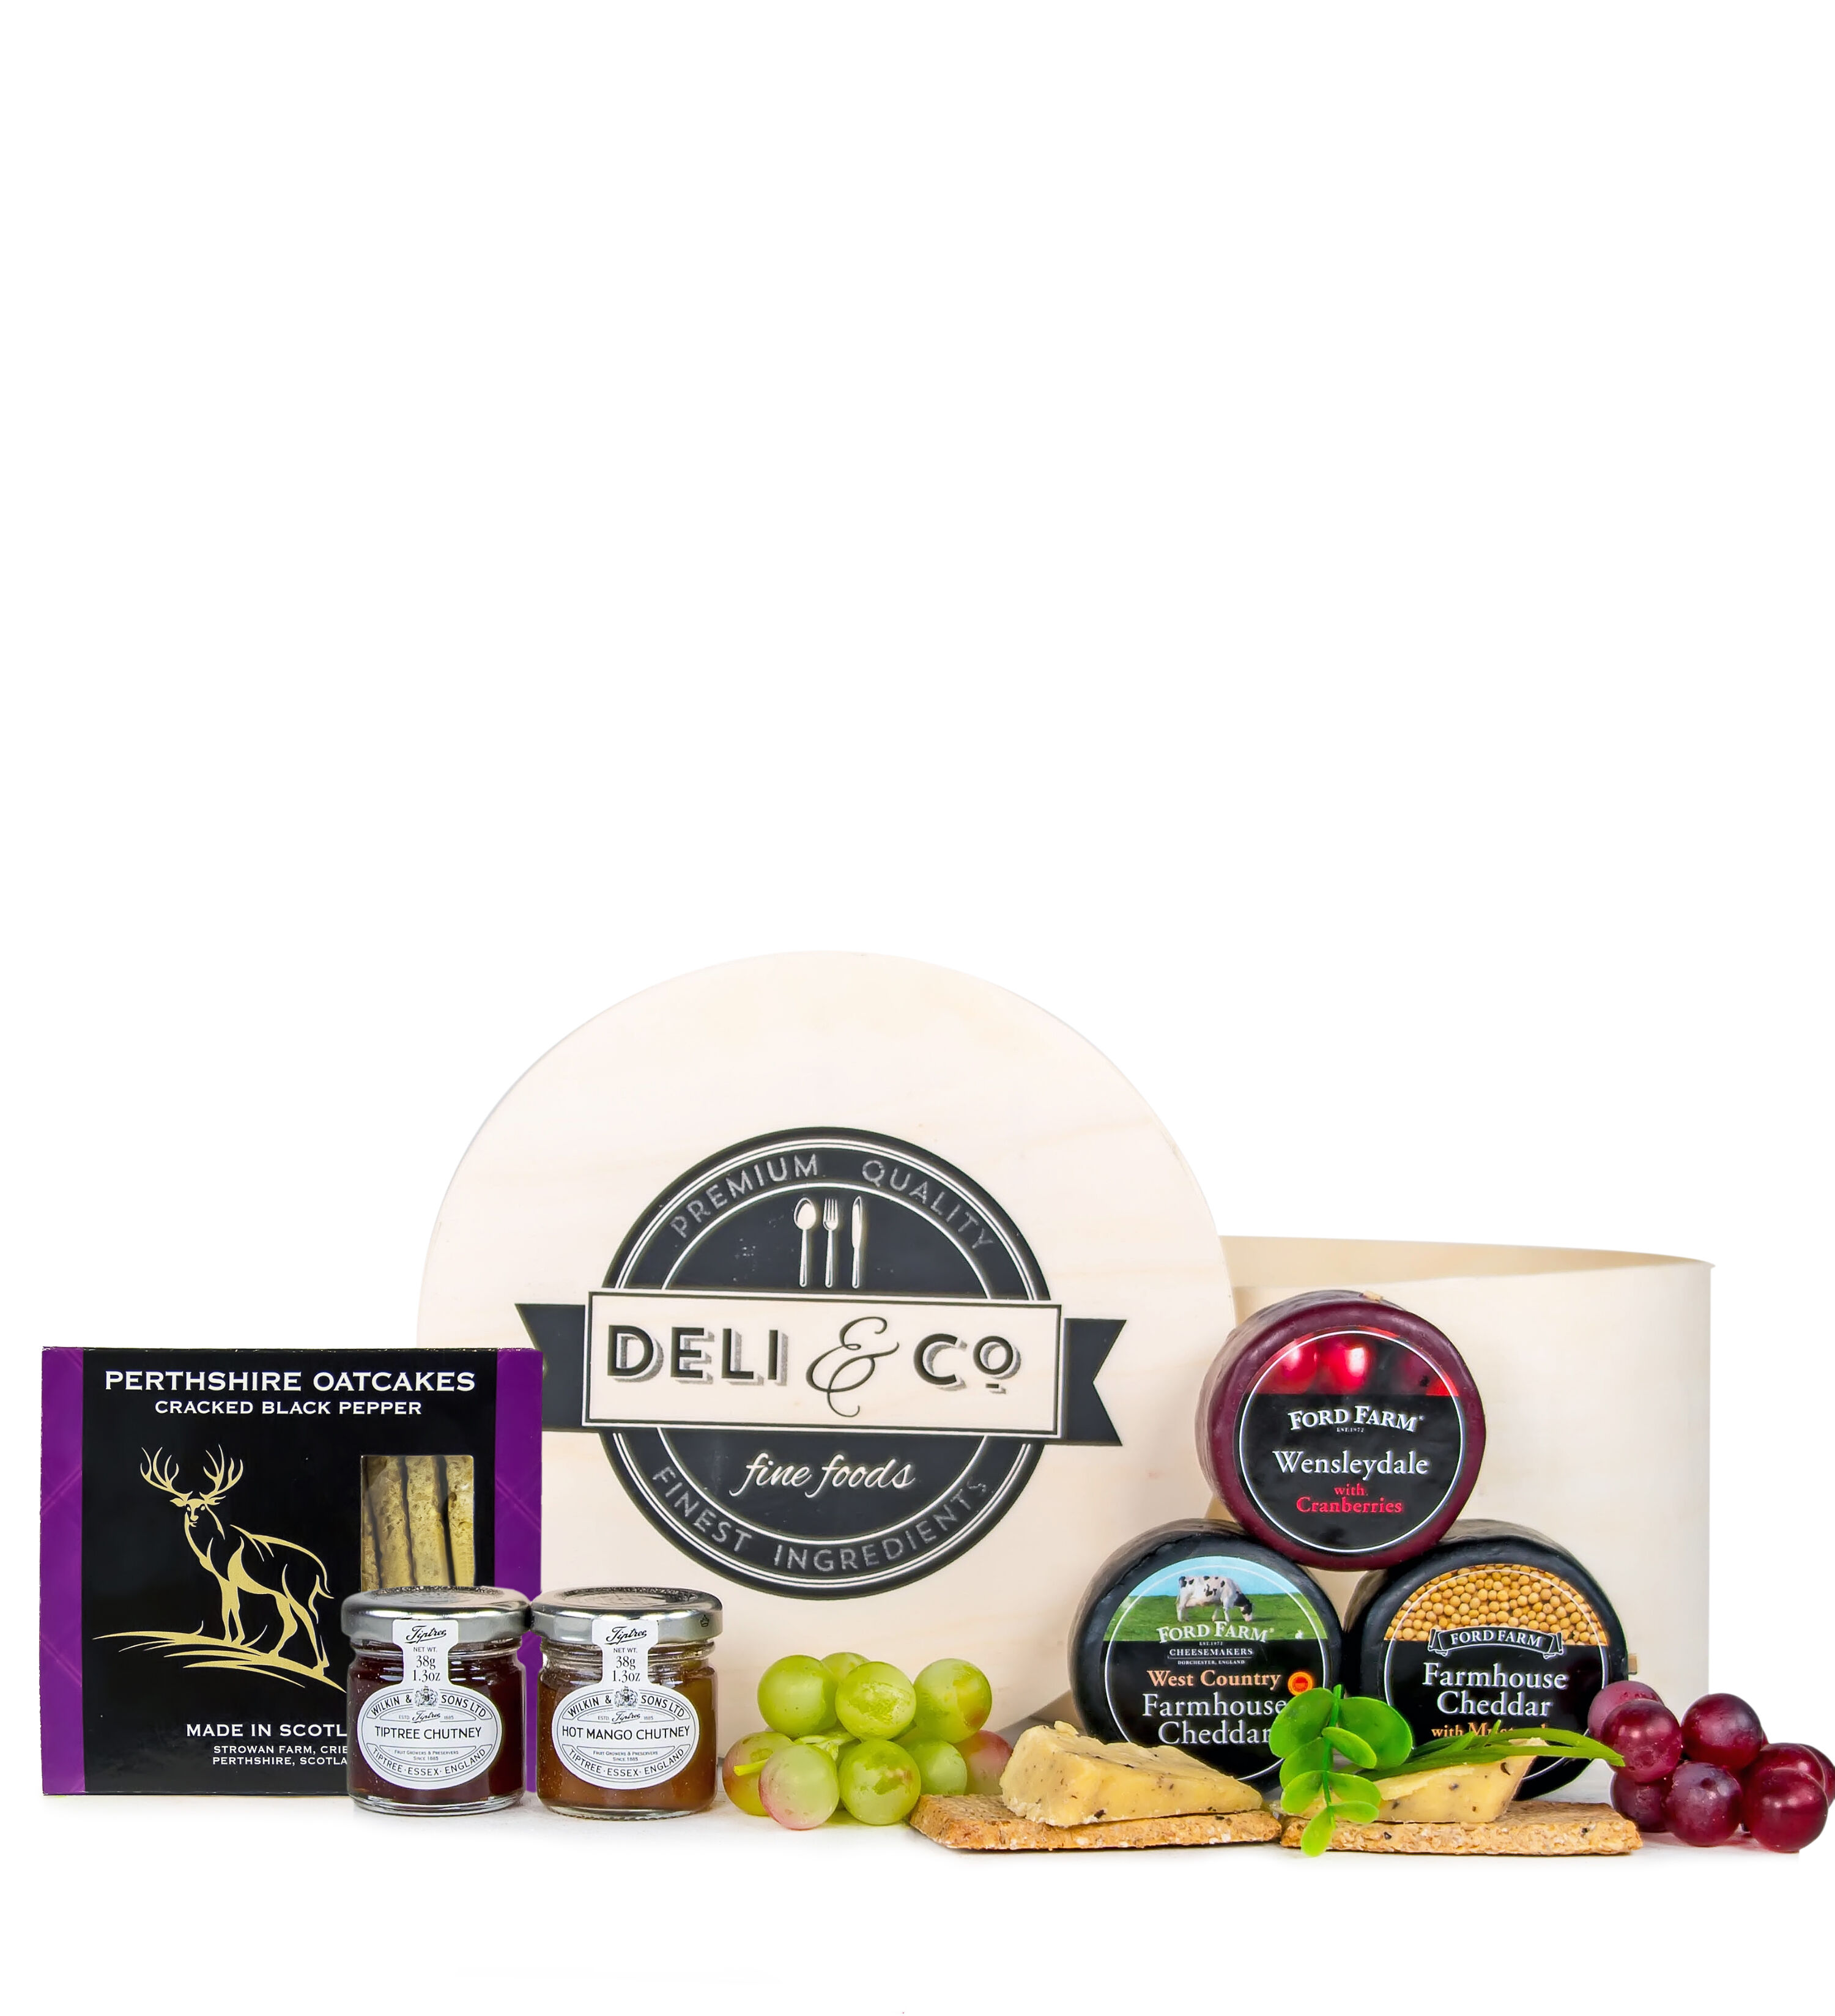 Deli Cheese Box - Cheese Gifts - Cheese Gift Baskets - Cheese Gift Delivery – Cheese Gifts UK – Cheese Gift Sets